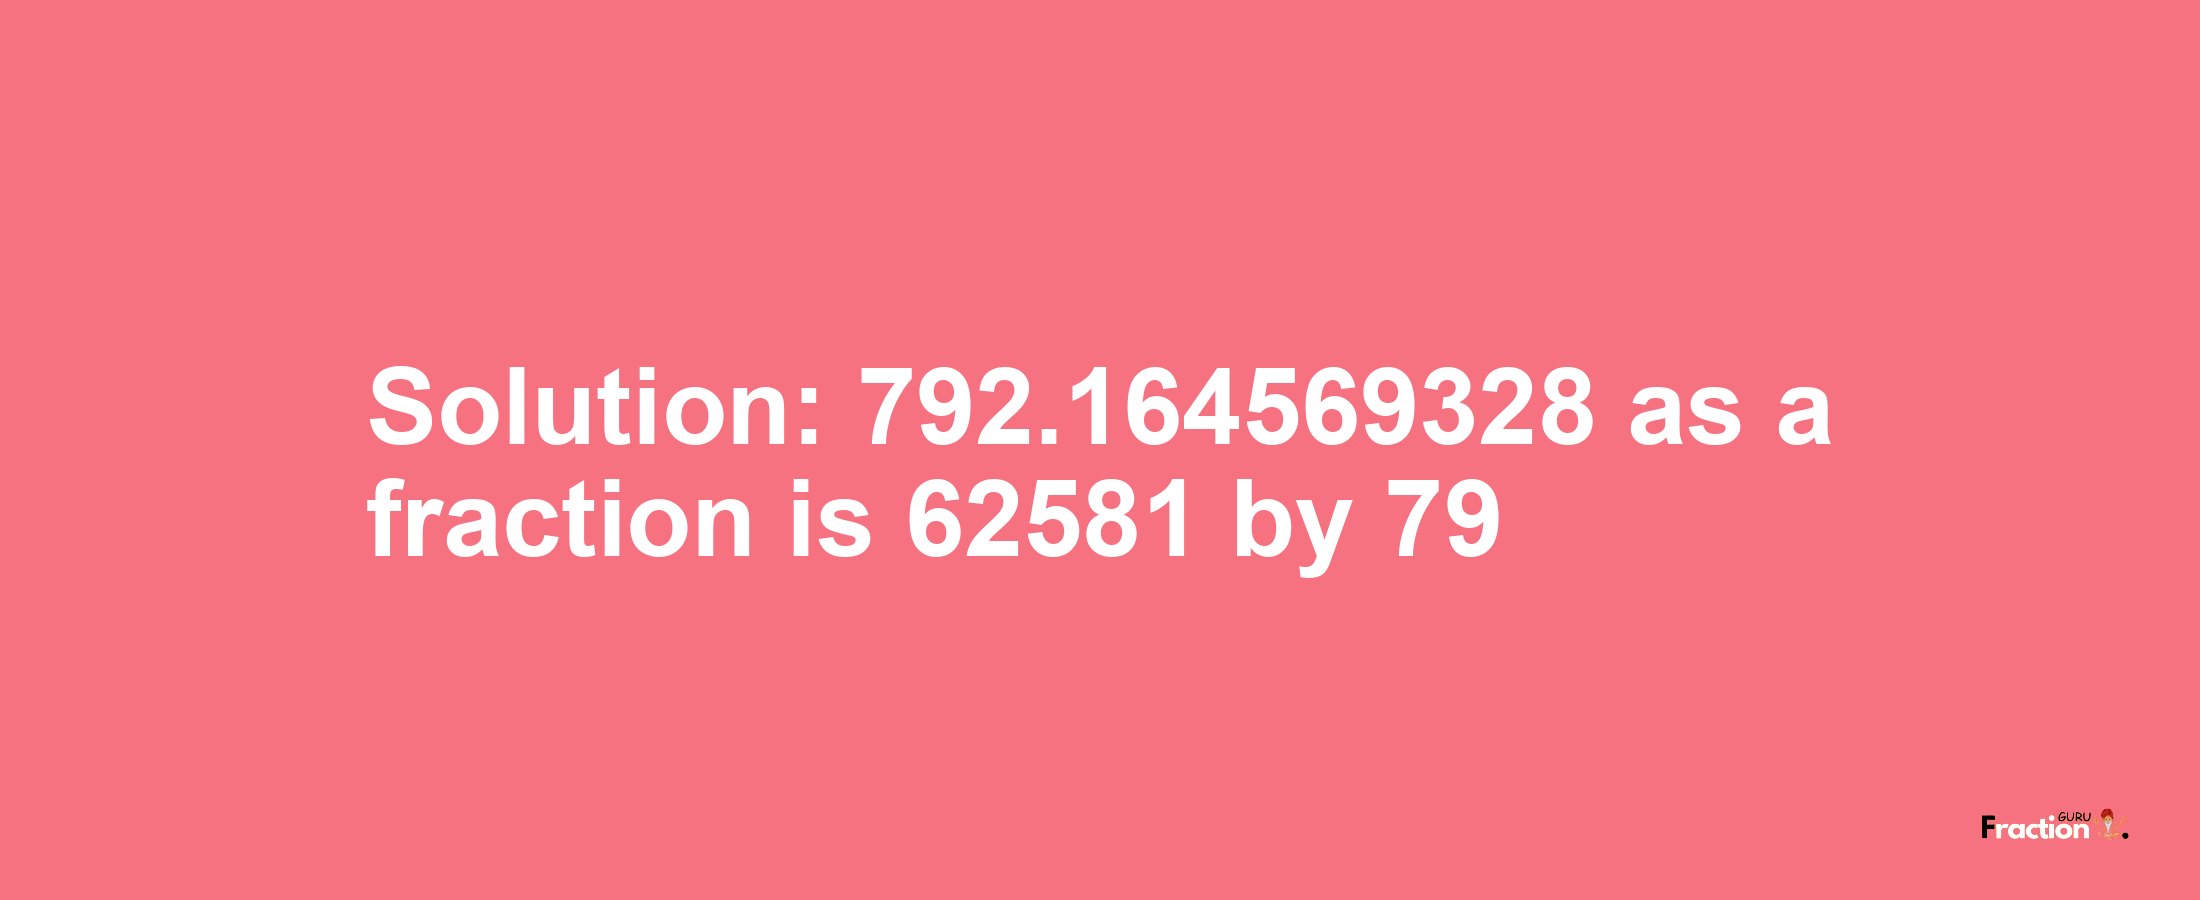 Solution:792.164569328 as a fraction is 62581/79